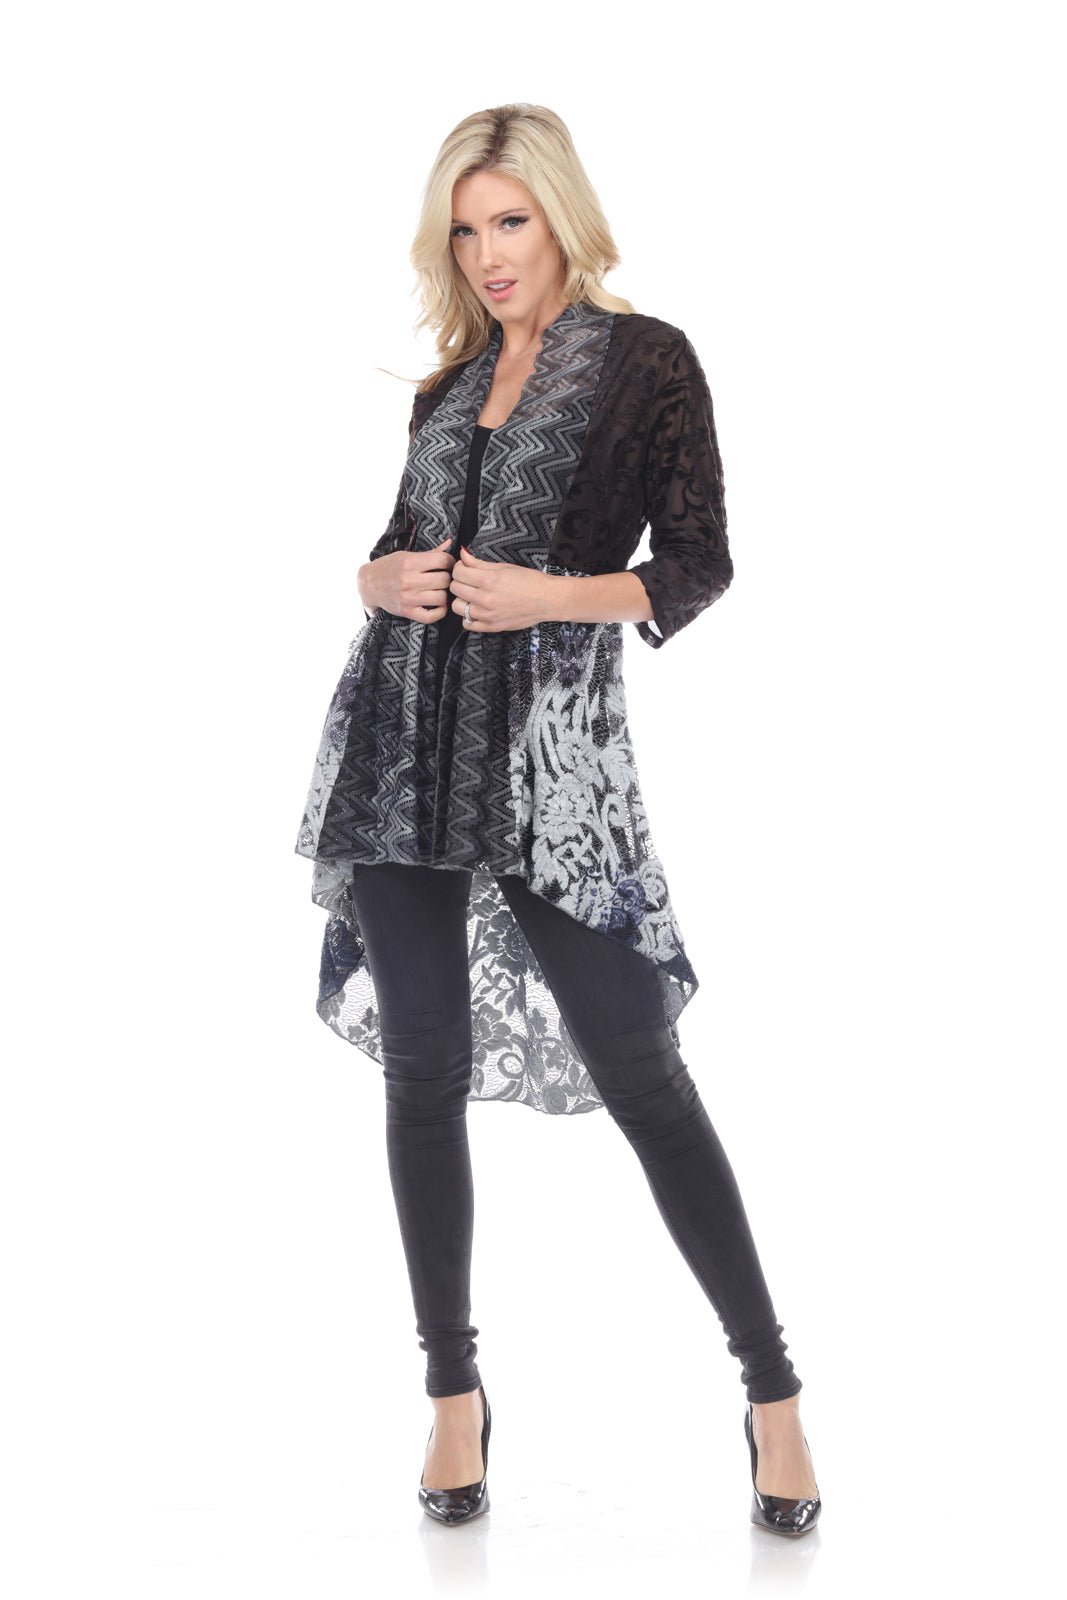 High-Low Lace Floral Light Weight Cardigan - Kamana Clothing